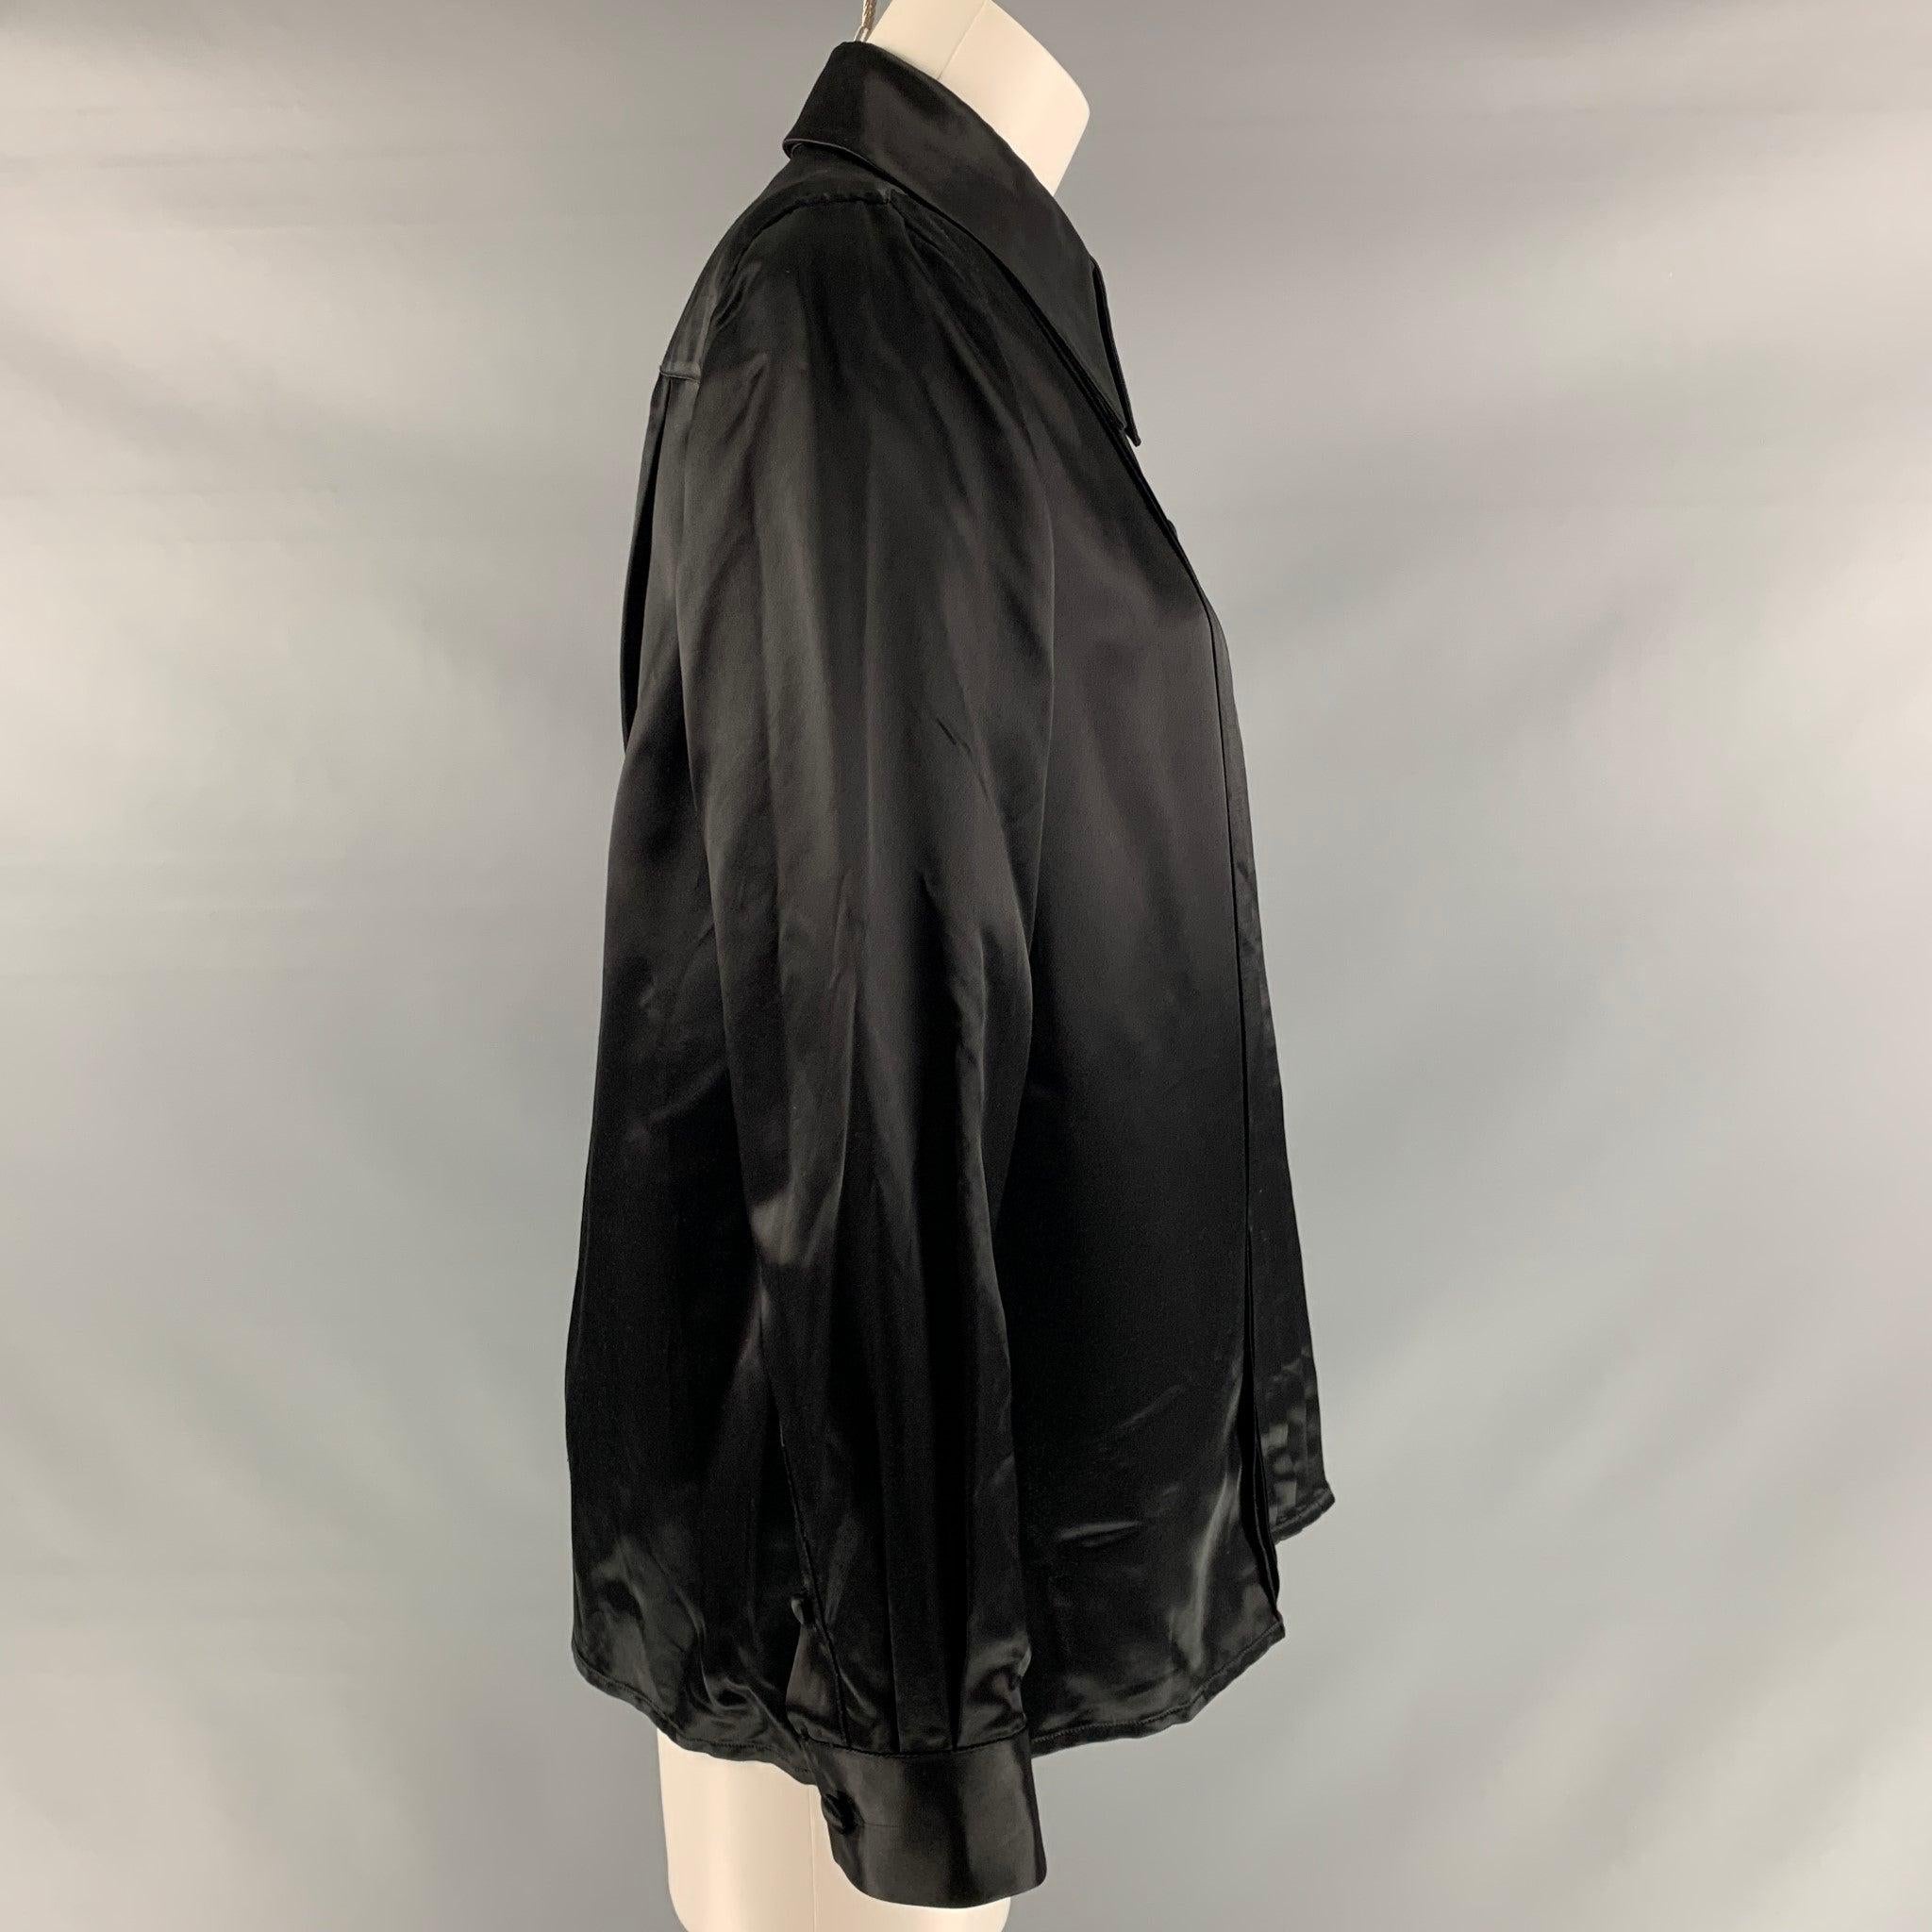 MARC JACOBS Runway Spring 2019 long sleeve shirt comes in black viscose sateen fabric featuring pleated (tuxedo) detail at front and button up closure. Made in USA.Excellent Pre-Owned Condition. 

Marked:   6 

Measurements: 
 
Shoulder: 16 inches